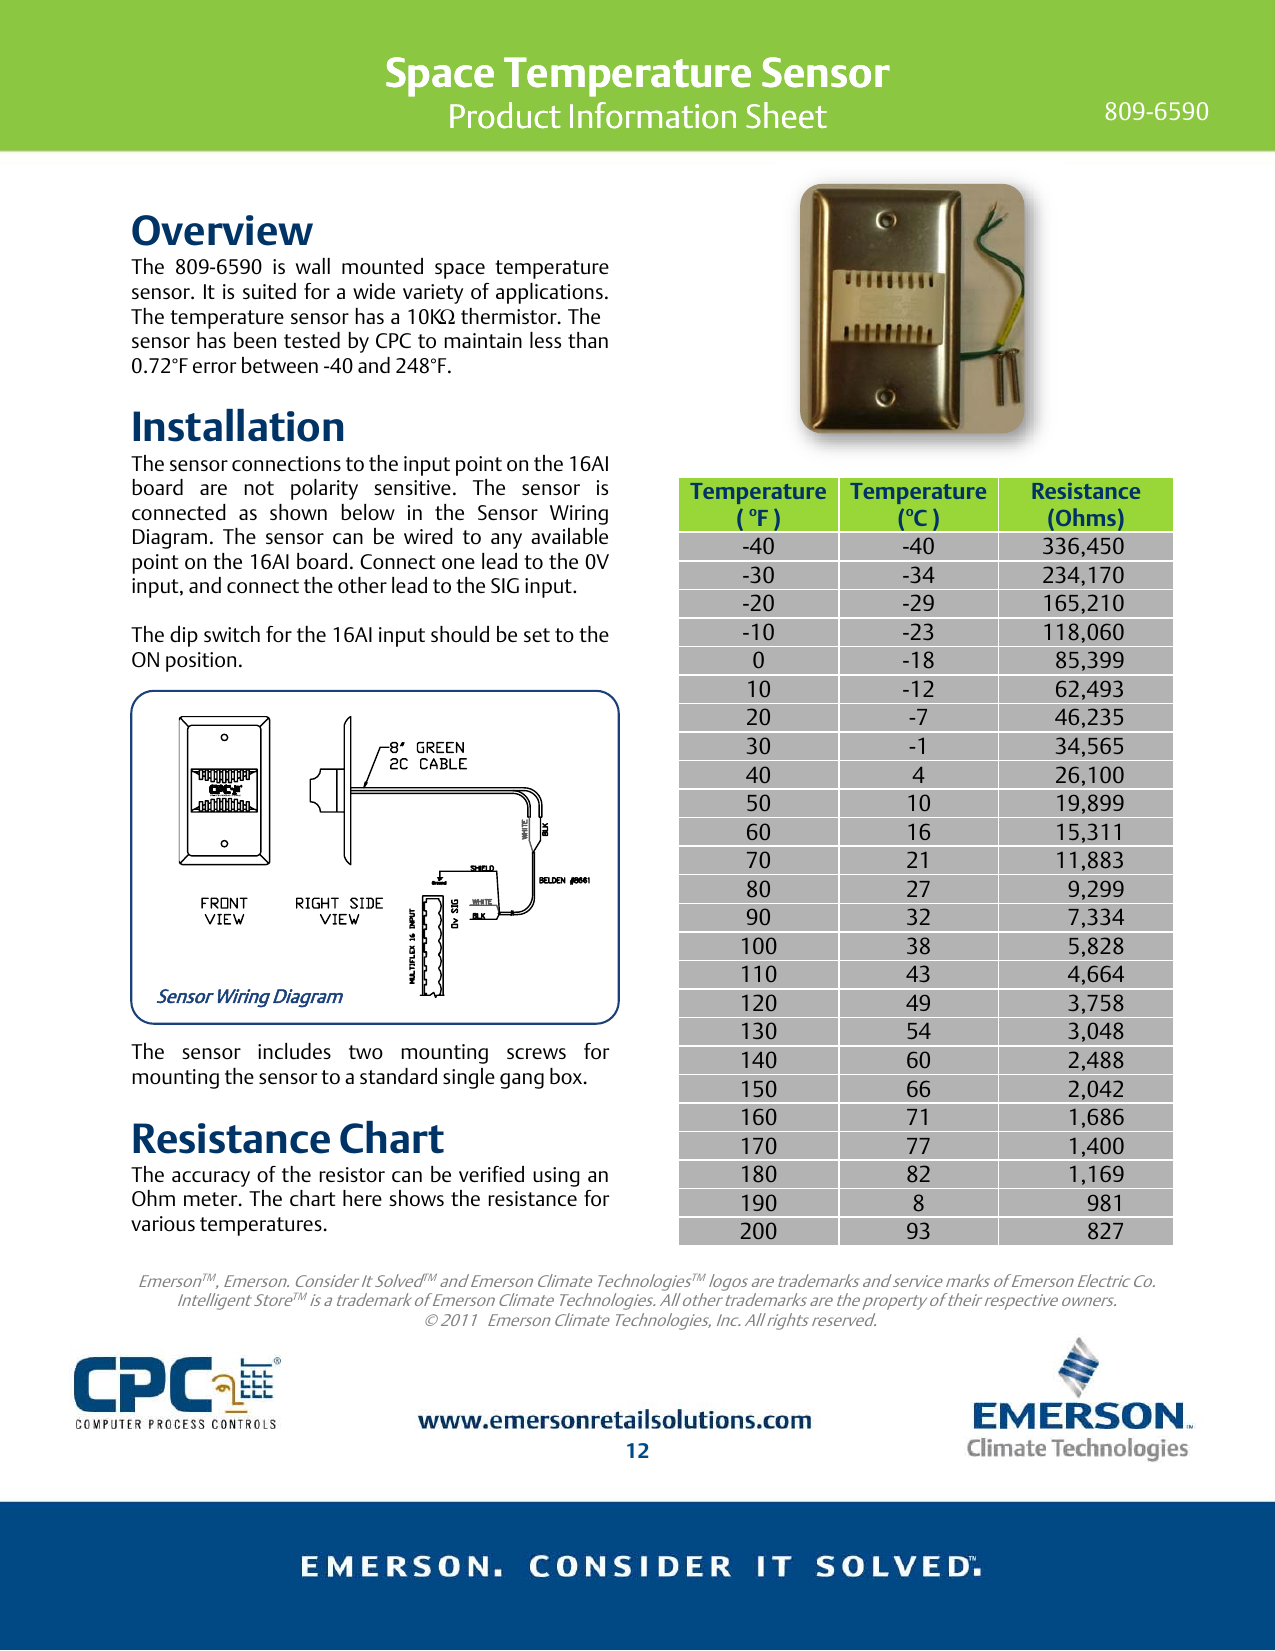 Space Temperature Sensor Overview Installation Resistance Chart